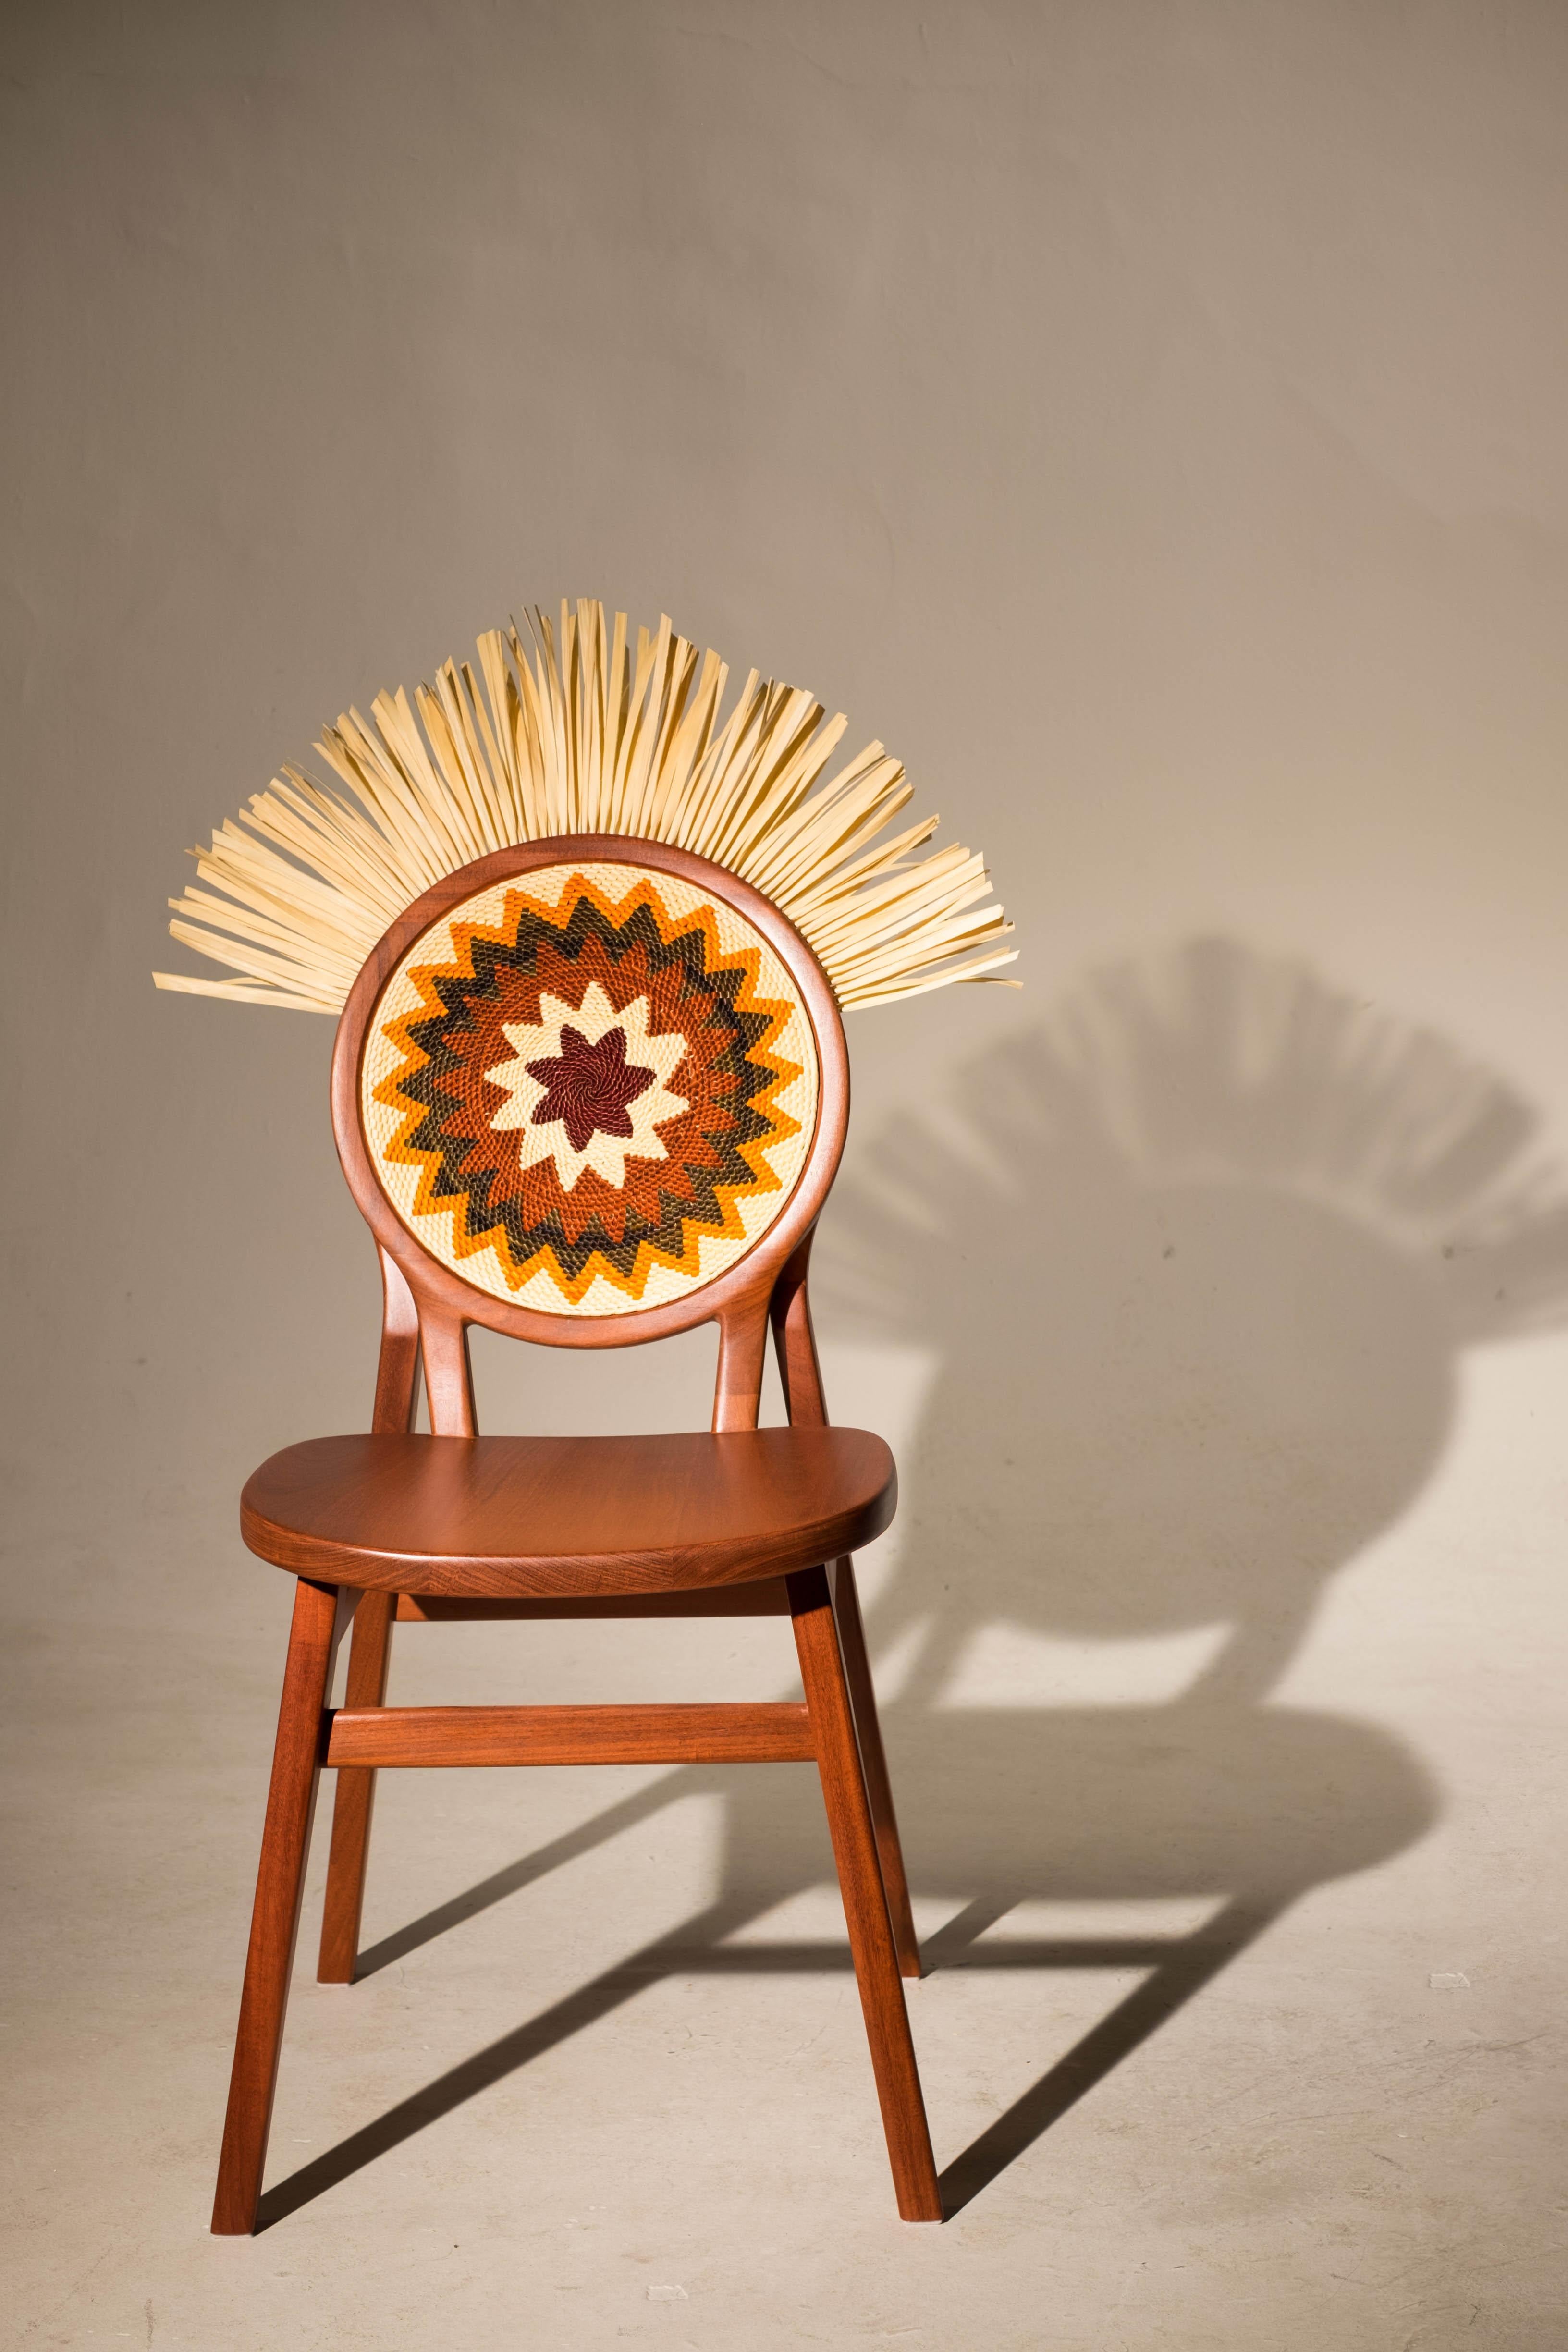 Cocar Chair is made from cabreúva wood to highlight the tradition of braiding tucumã straw from the Amazon rainforest. It is more than a chair, it's a manifesto. 

Crafts are culture. It is full of meanings, of reasons to be alive till these days.